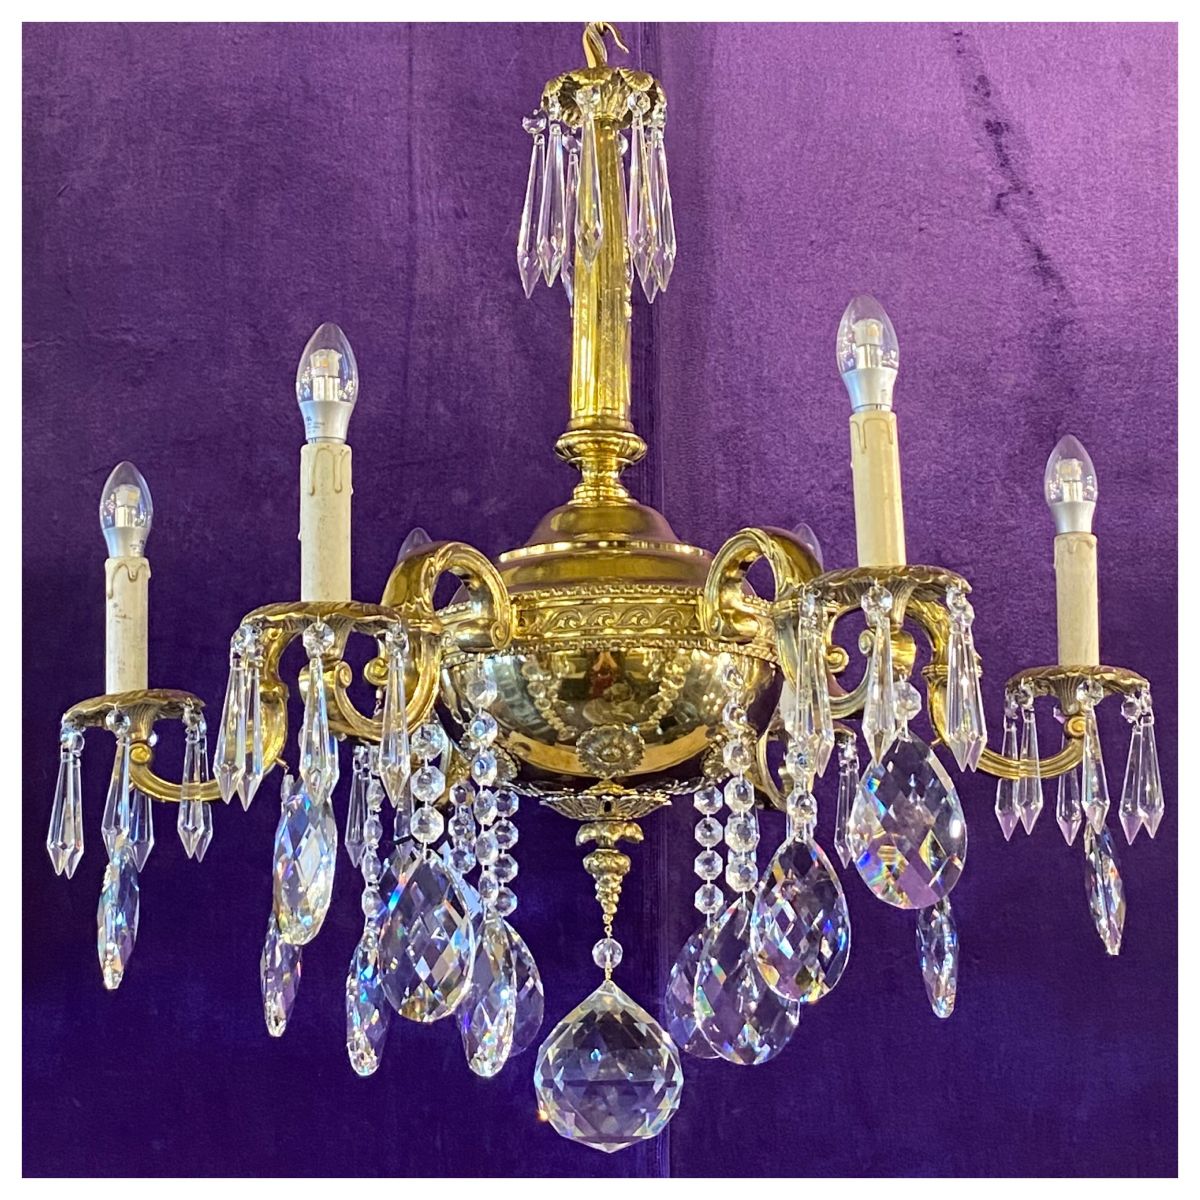 Very Heavy Antique Brass Chandelier with Crystals